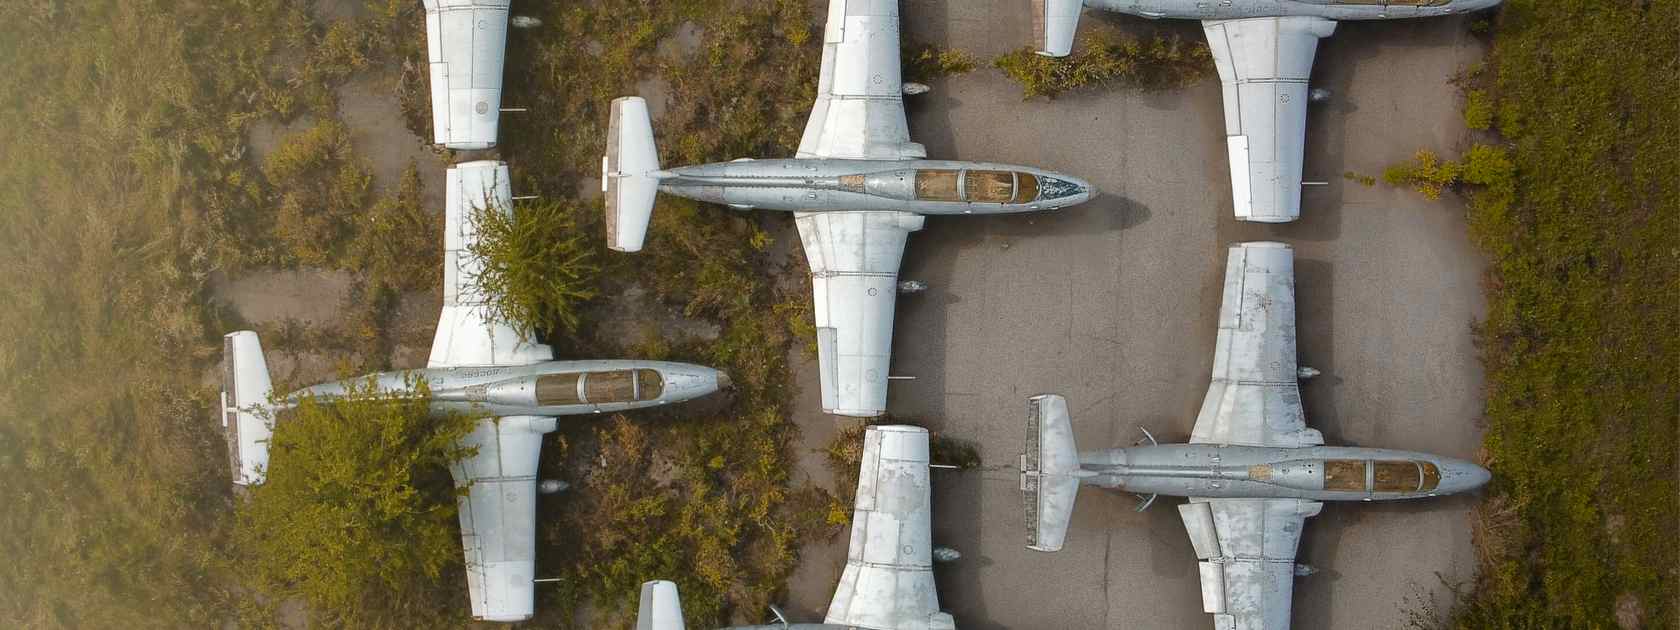 A top view of old rusty airplanes. 